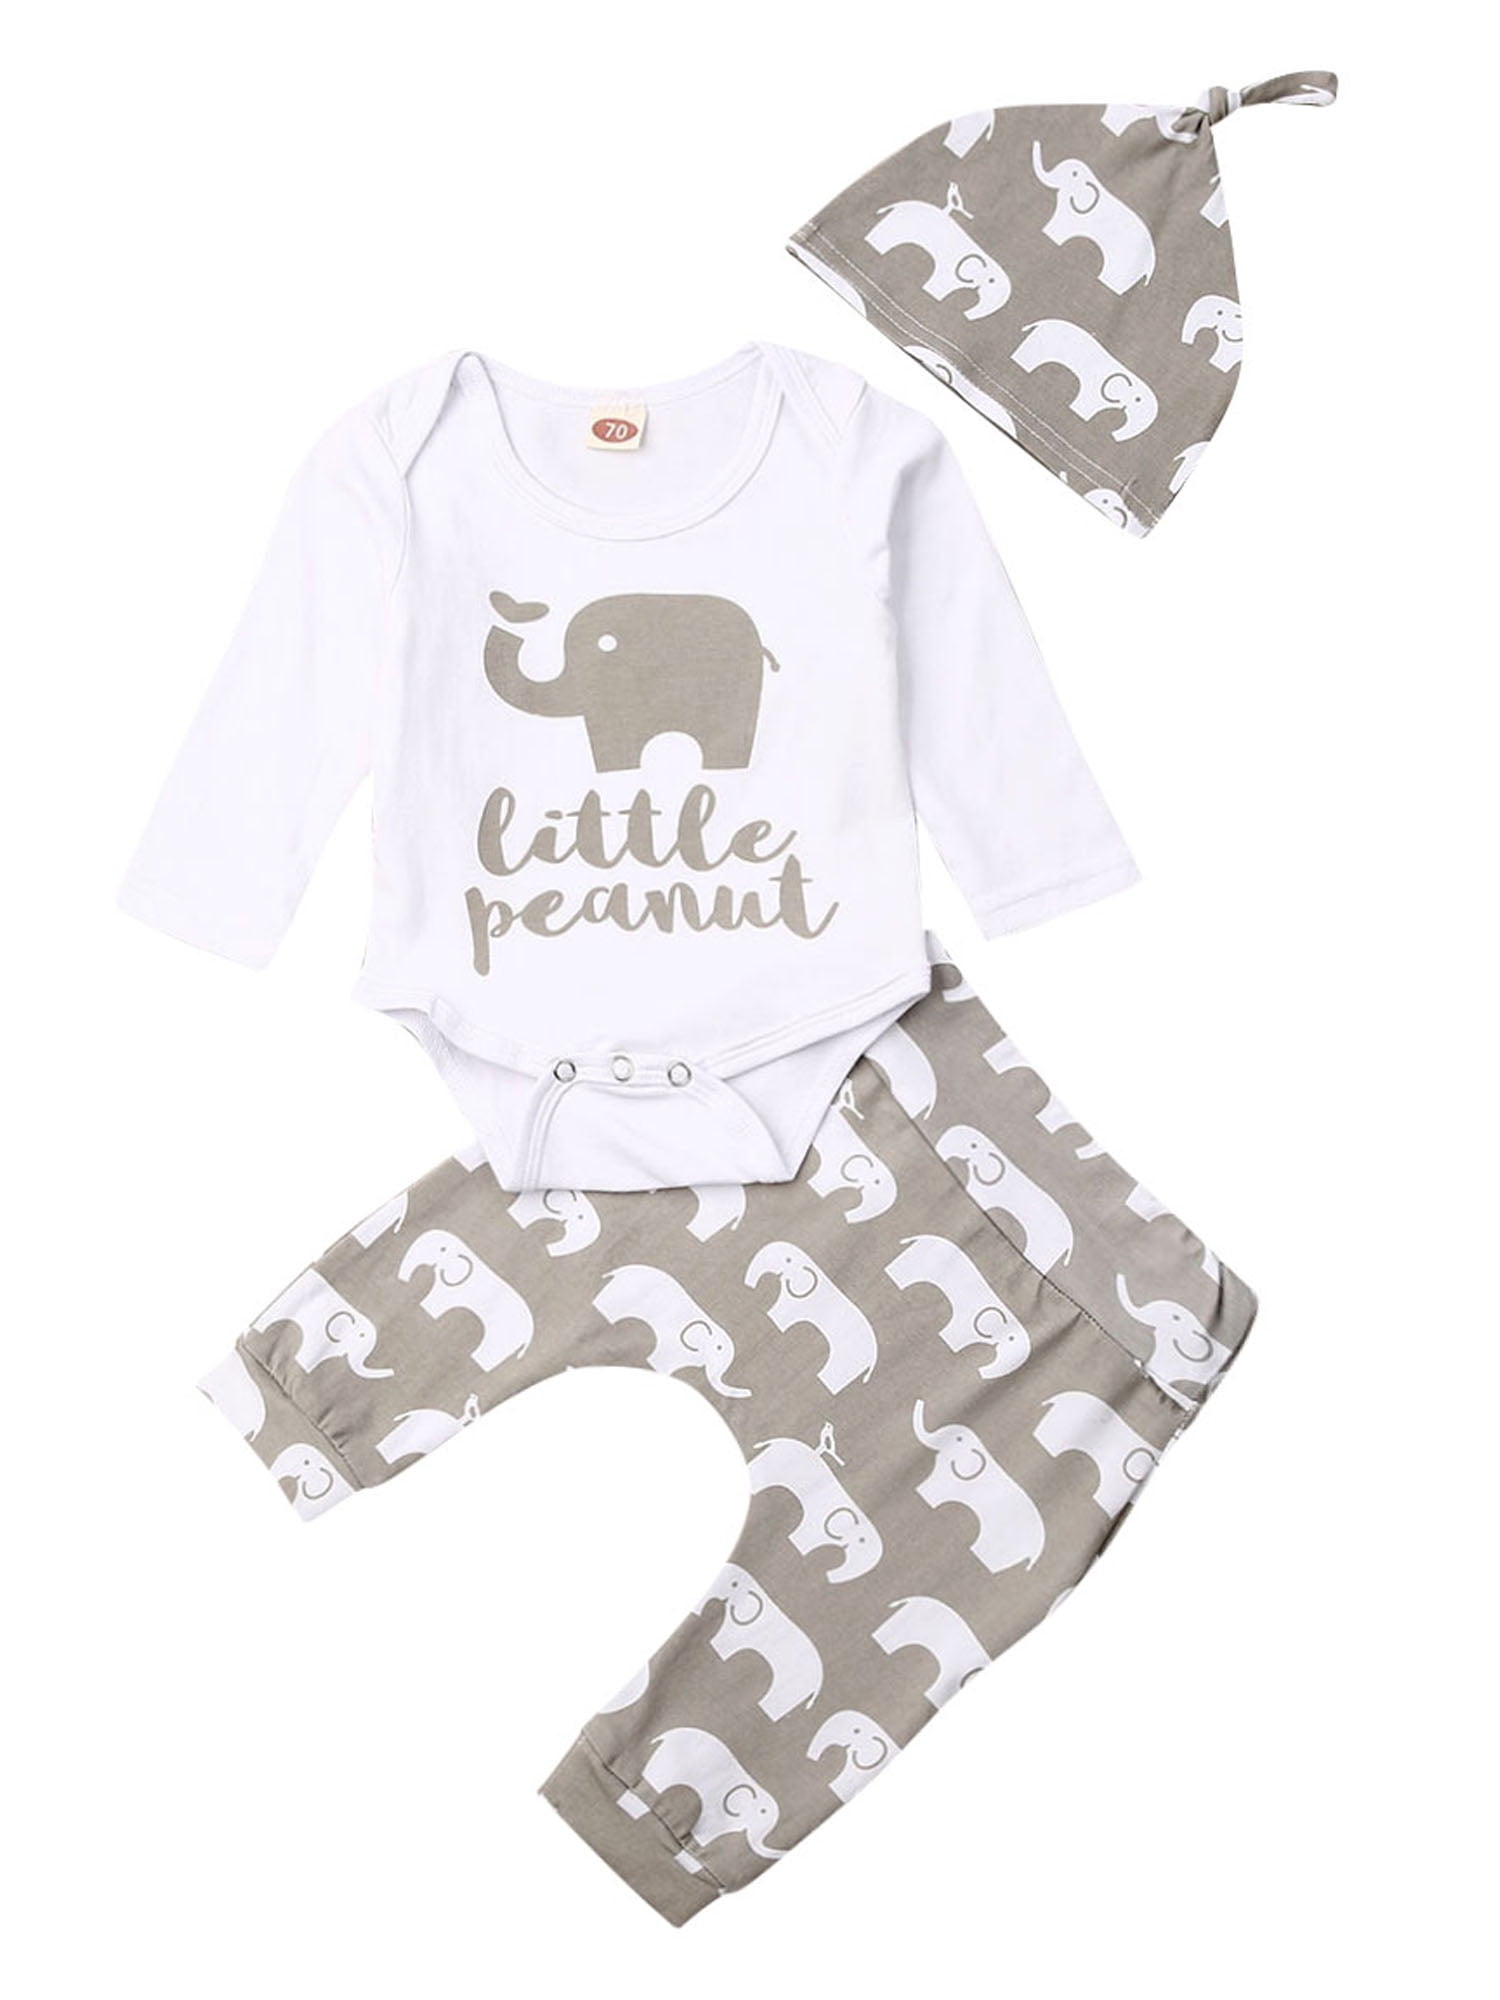 Kantenia Newborn Baby Boy Clothes Letter Print Romper Tops Bodysuit Long Pants with Hat Outfits Set 0-12 Months